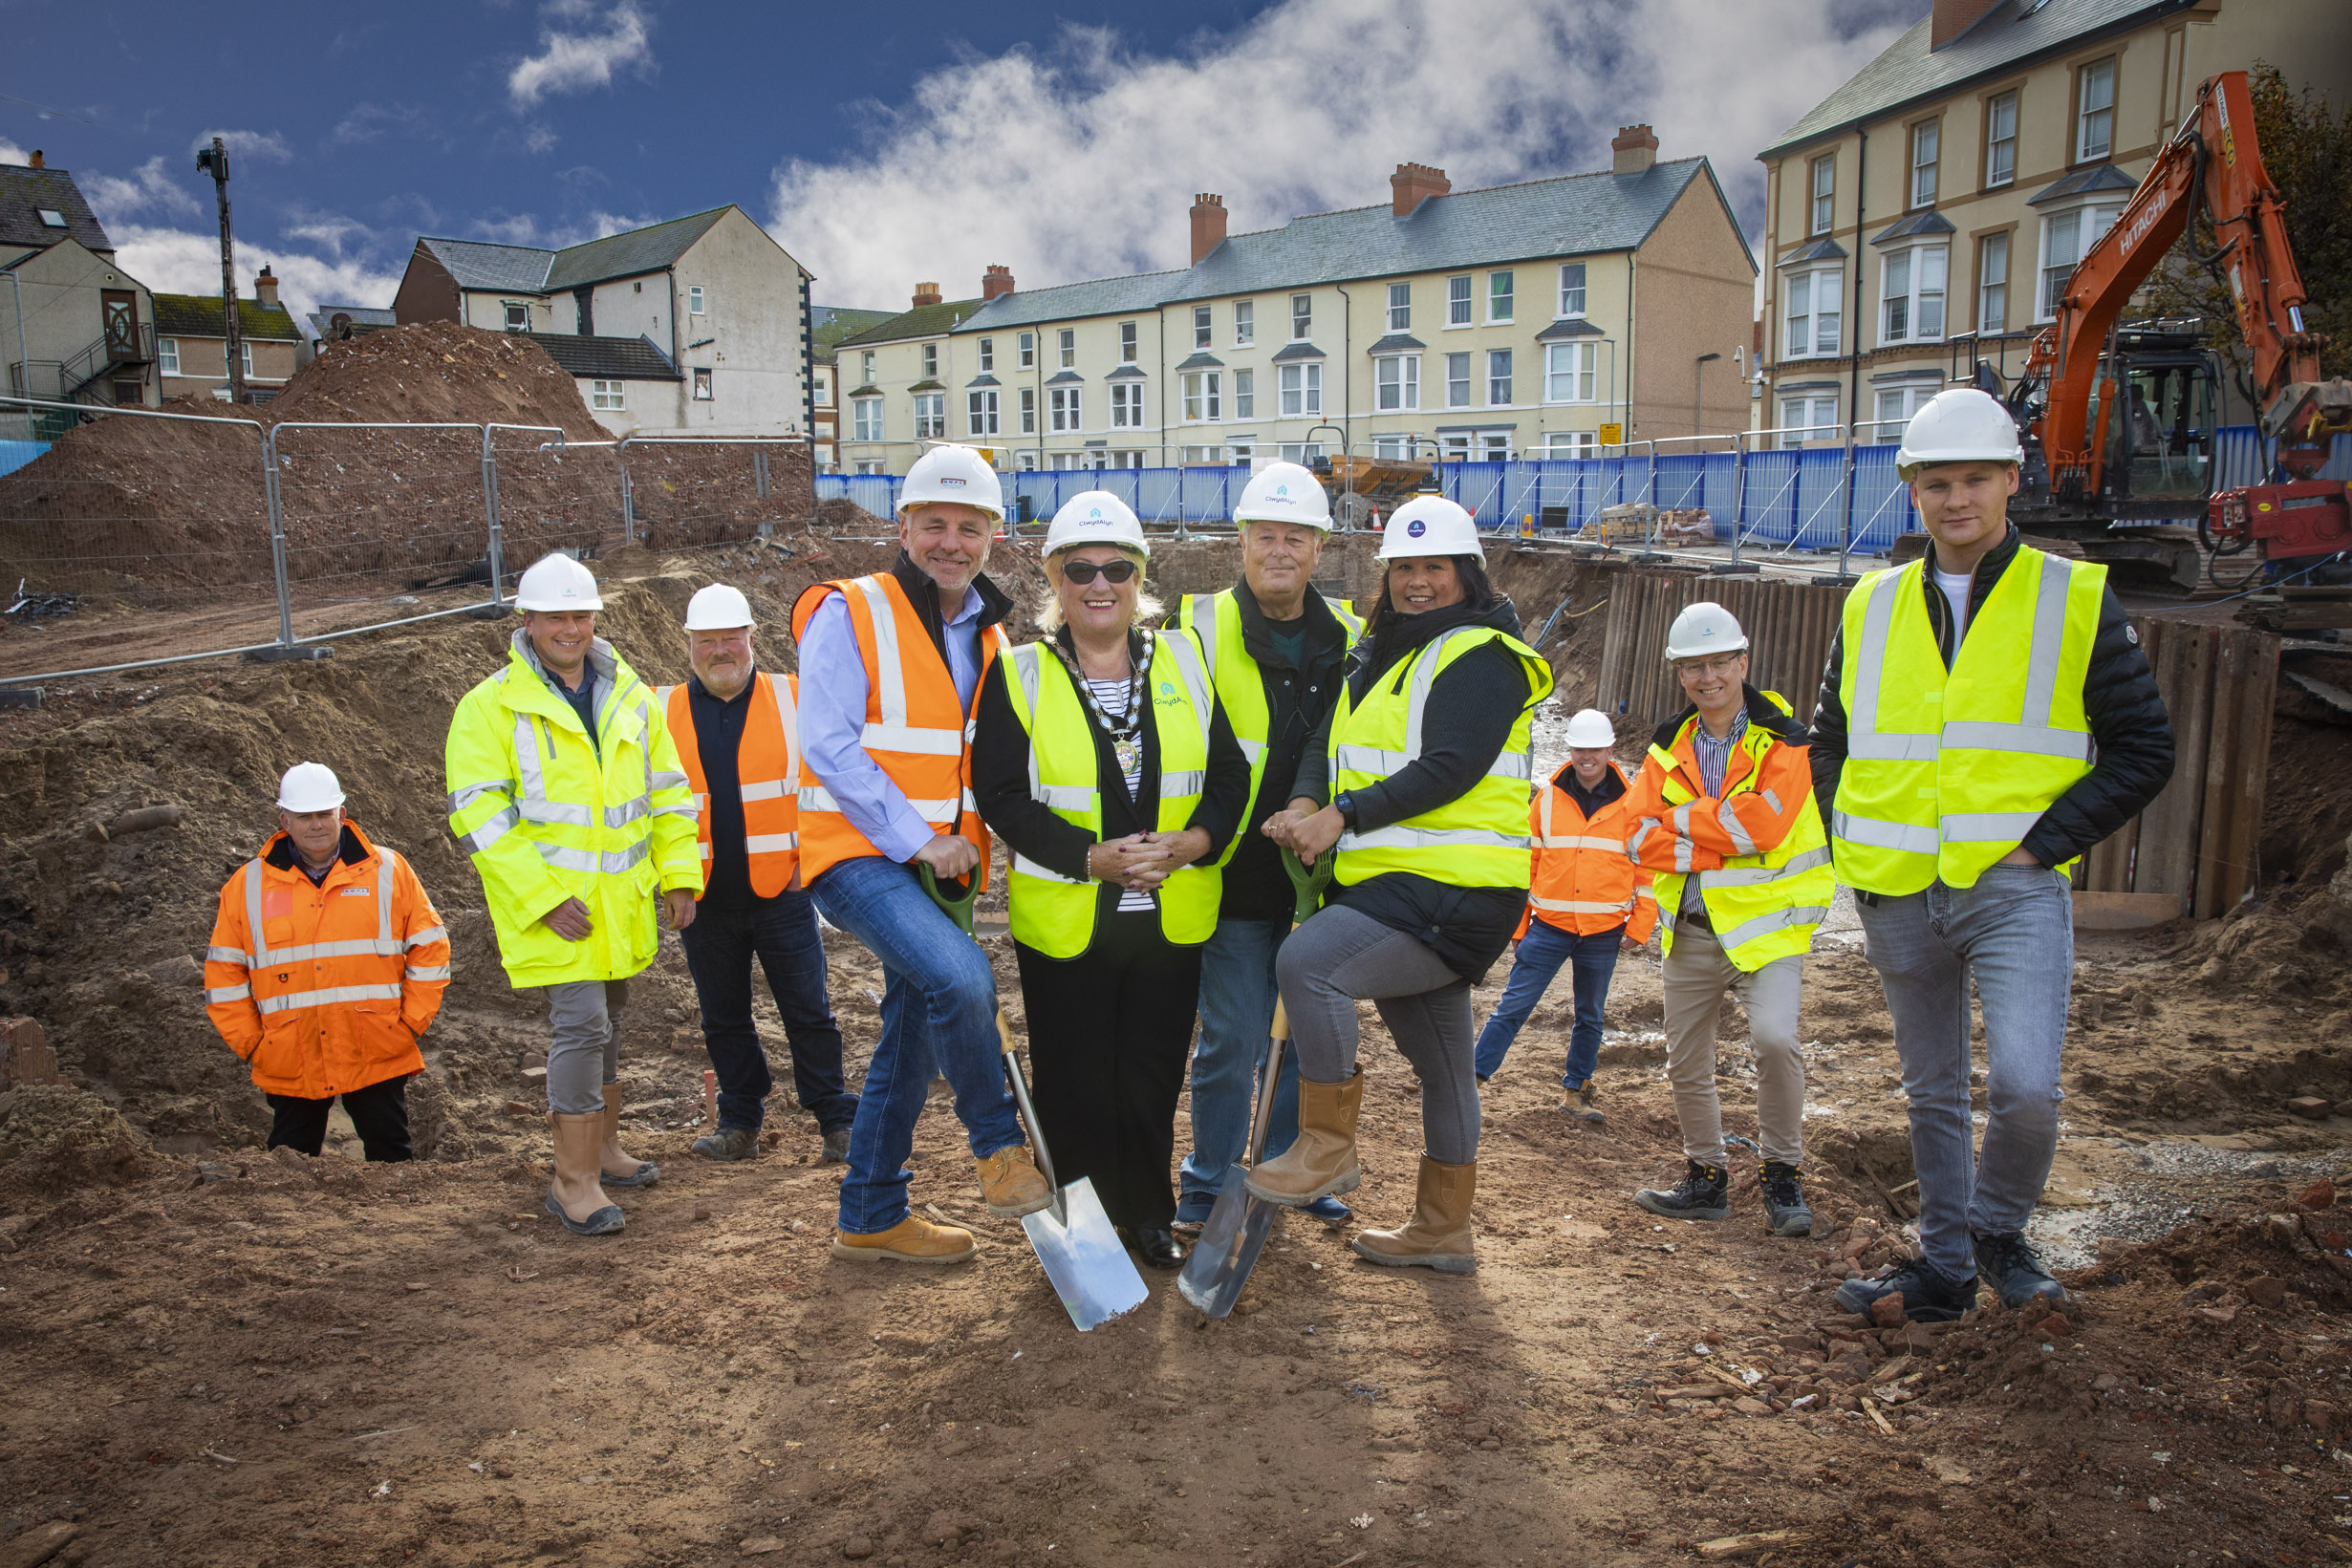 Major regeneration project begins with ground breaking ceremony